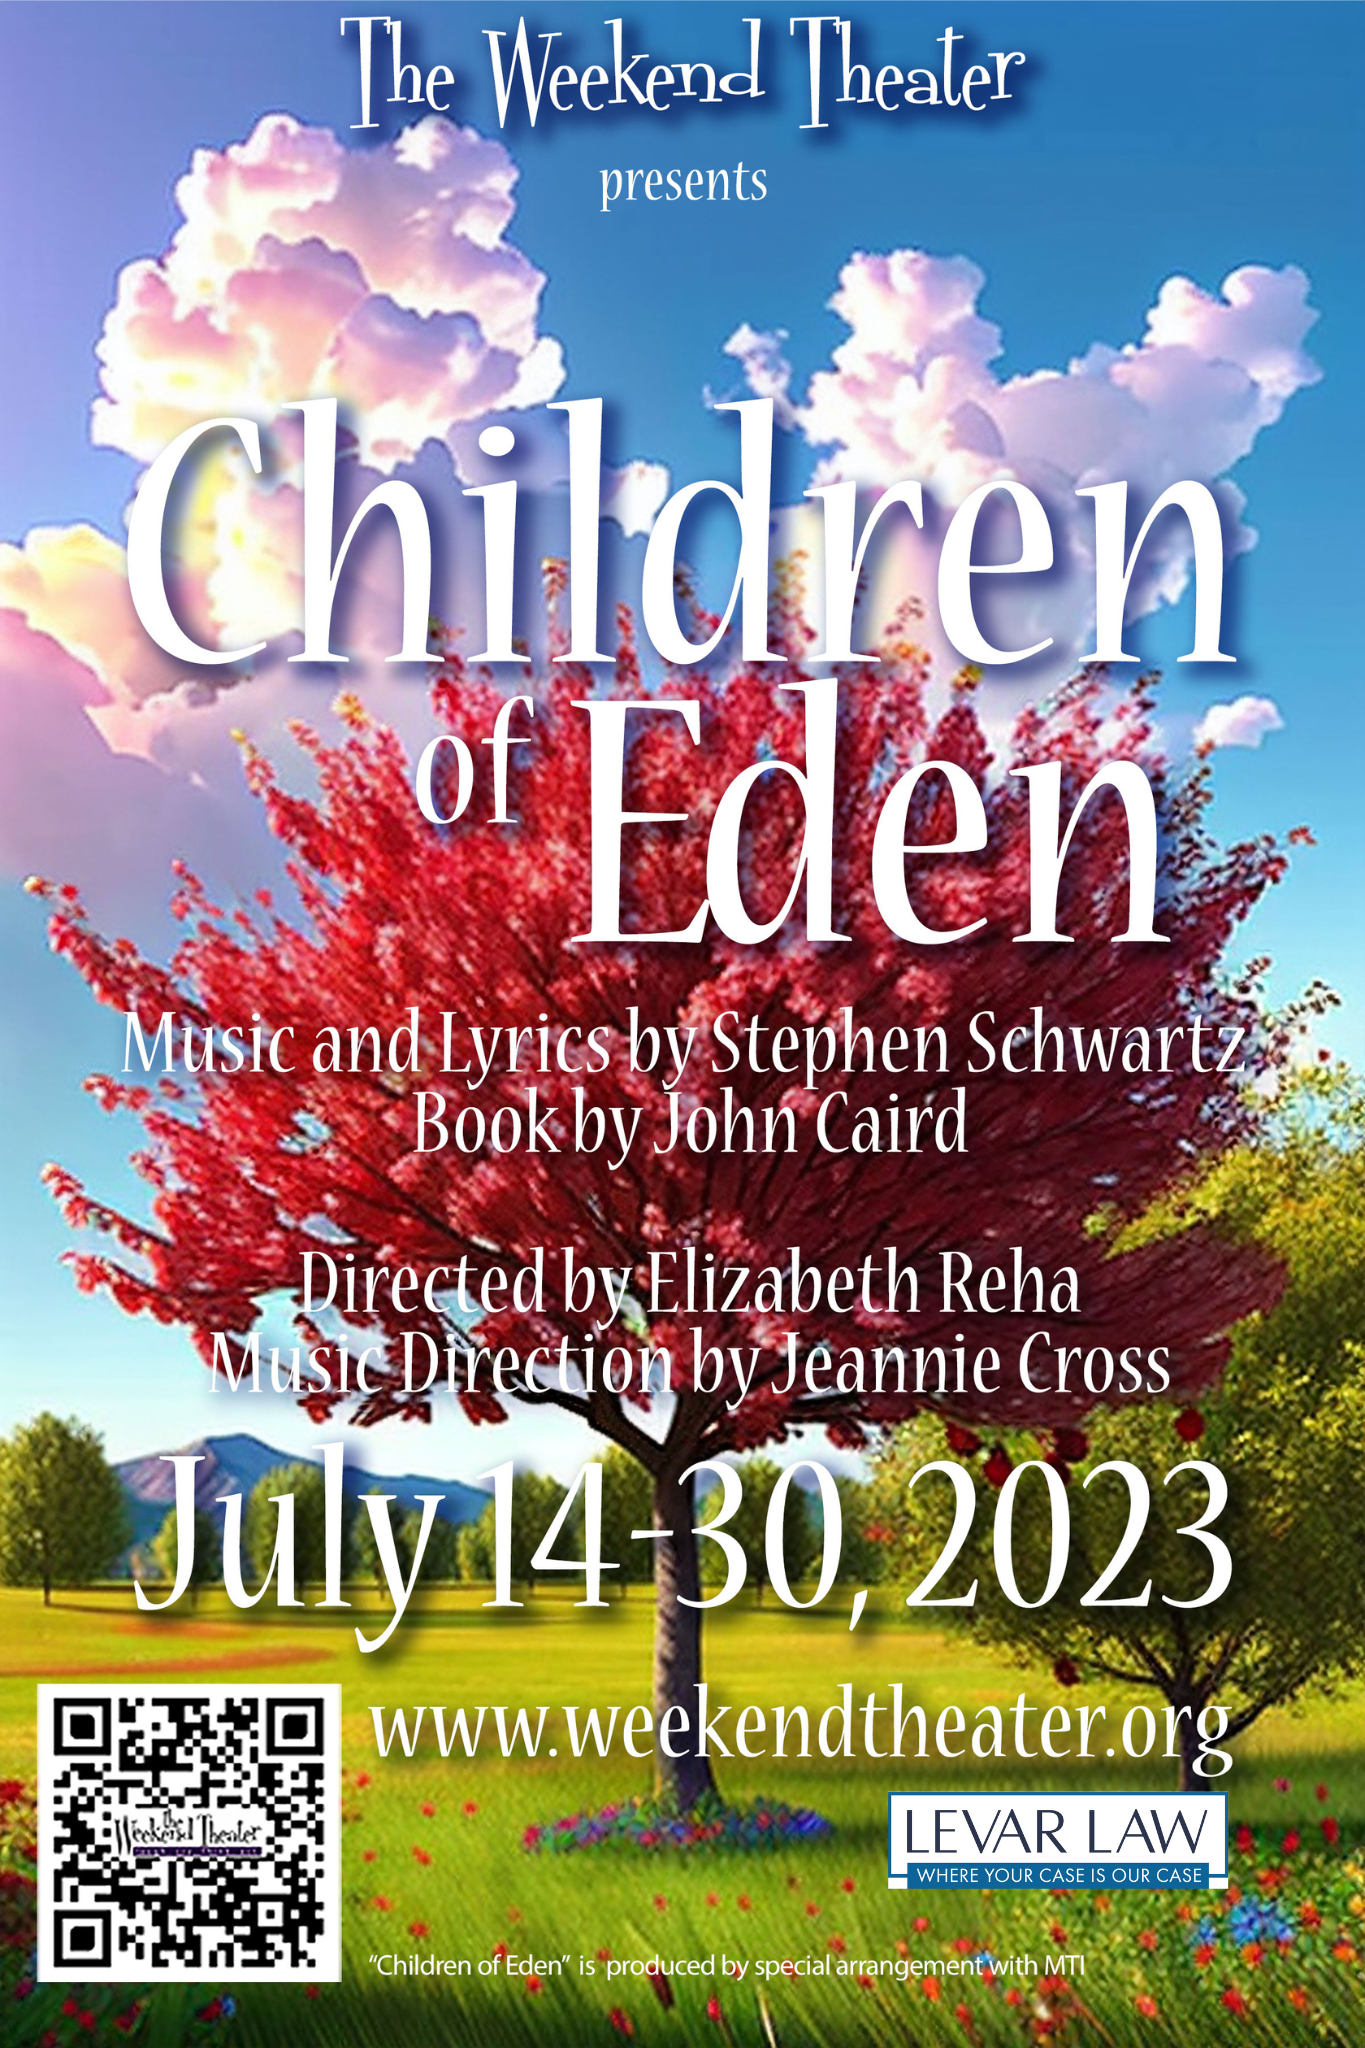 Announcing the Cast of Children of Eden at The Weekend Theater